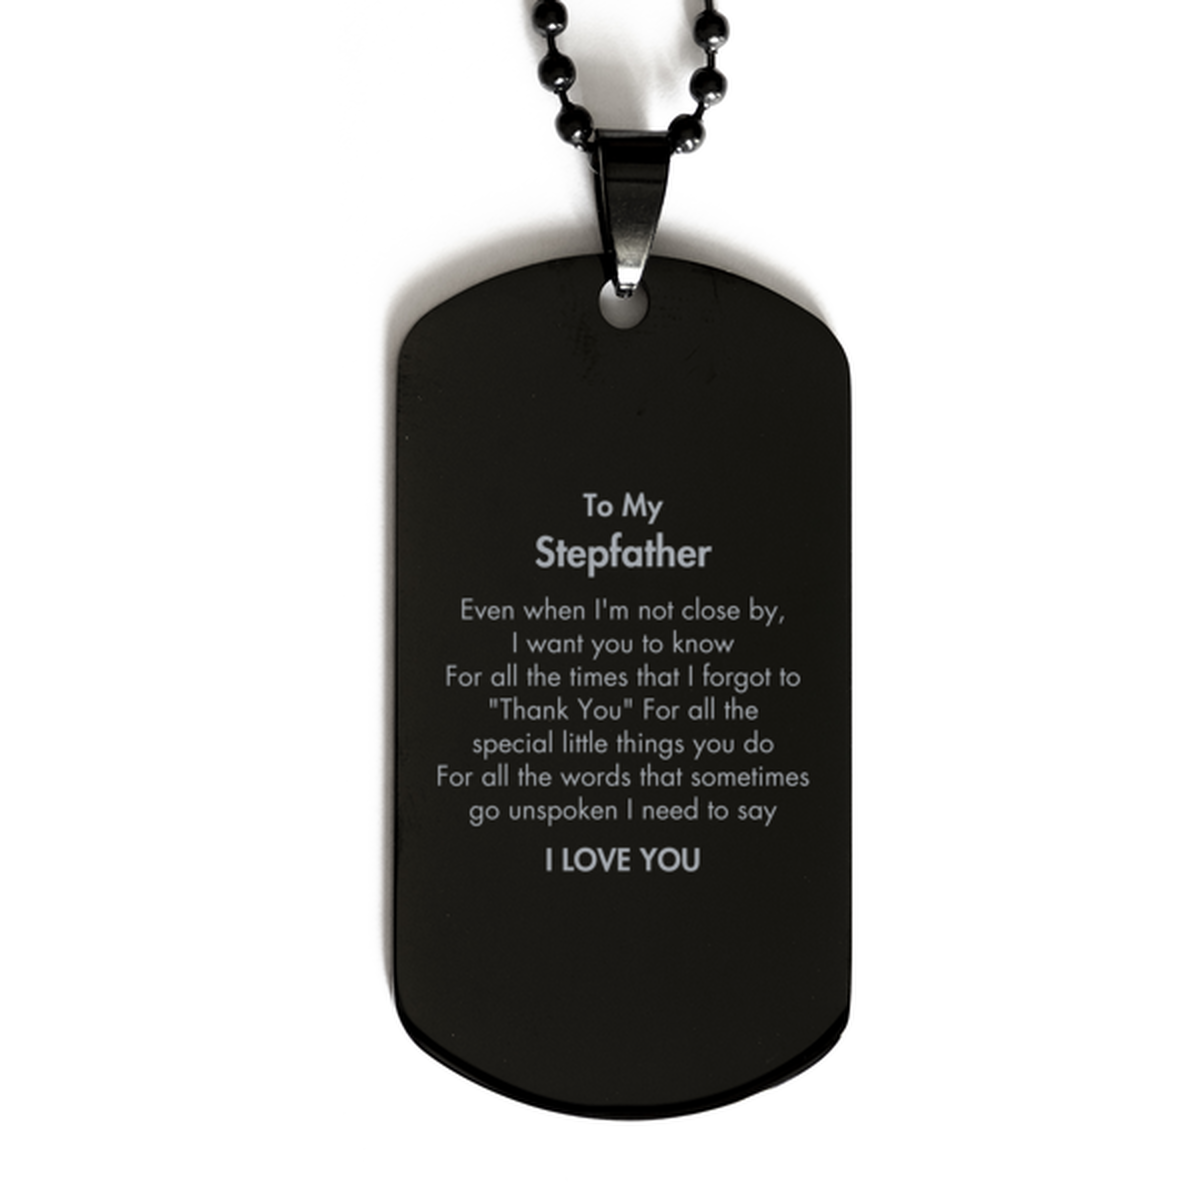 Thank You Gifts for Stepfather, Keepsake Black Dog Tag Gifts for Stepfather Birthday Mother's day Father's Day Stepfather For all the words That sometimes go unspoken I need to say I LOVE YOU